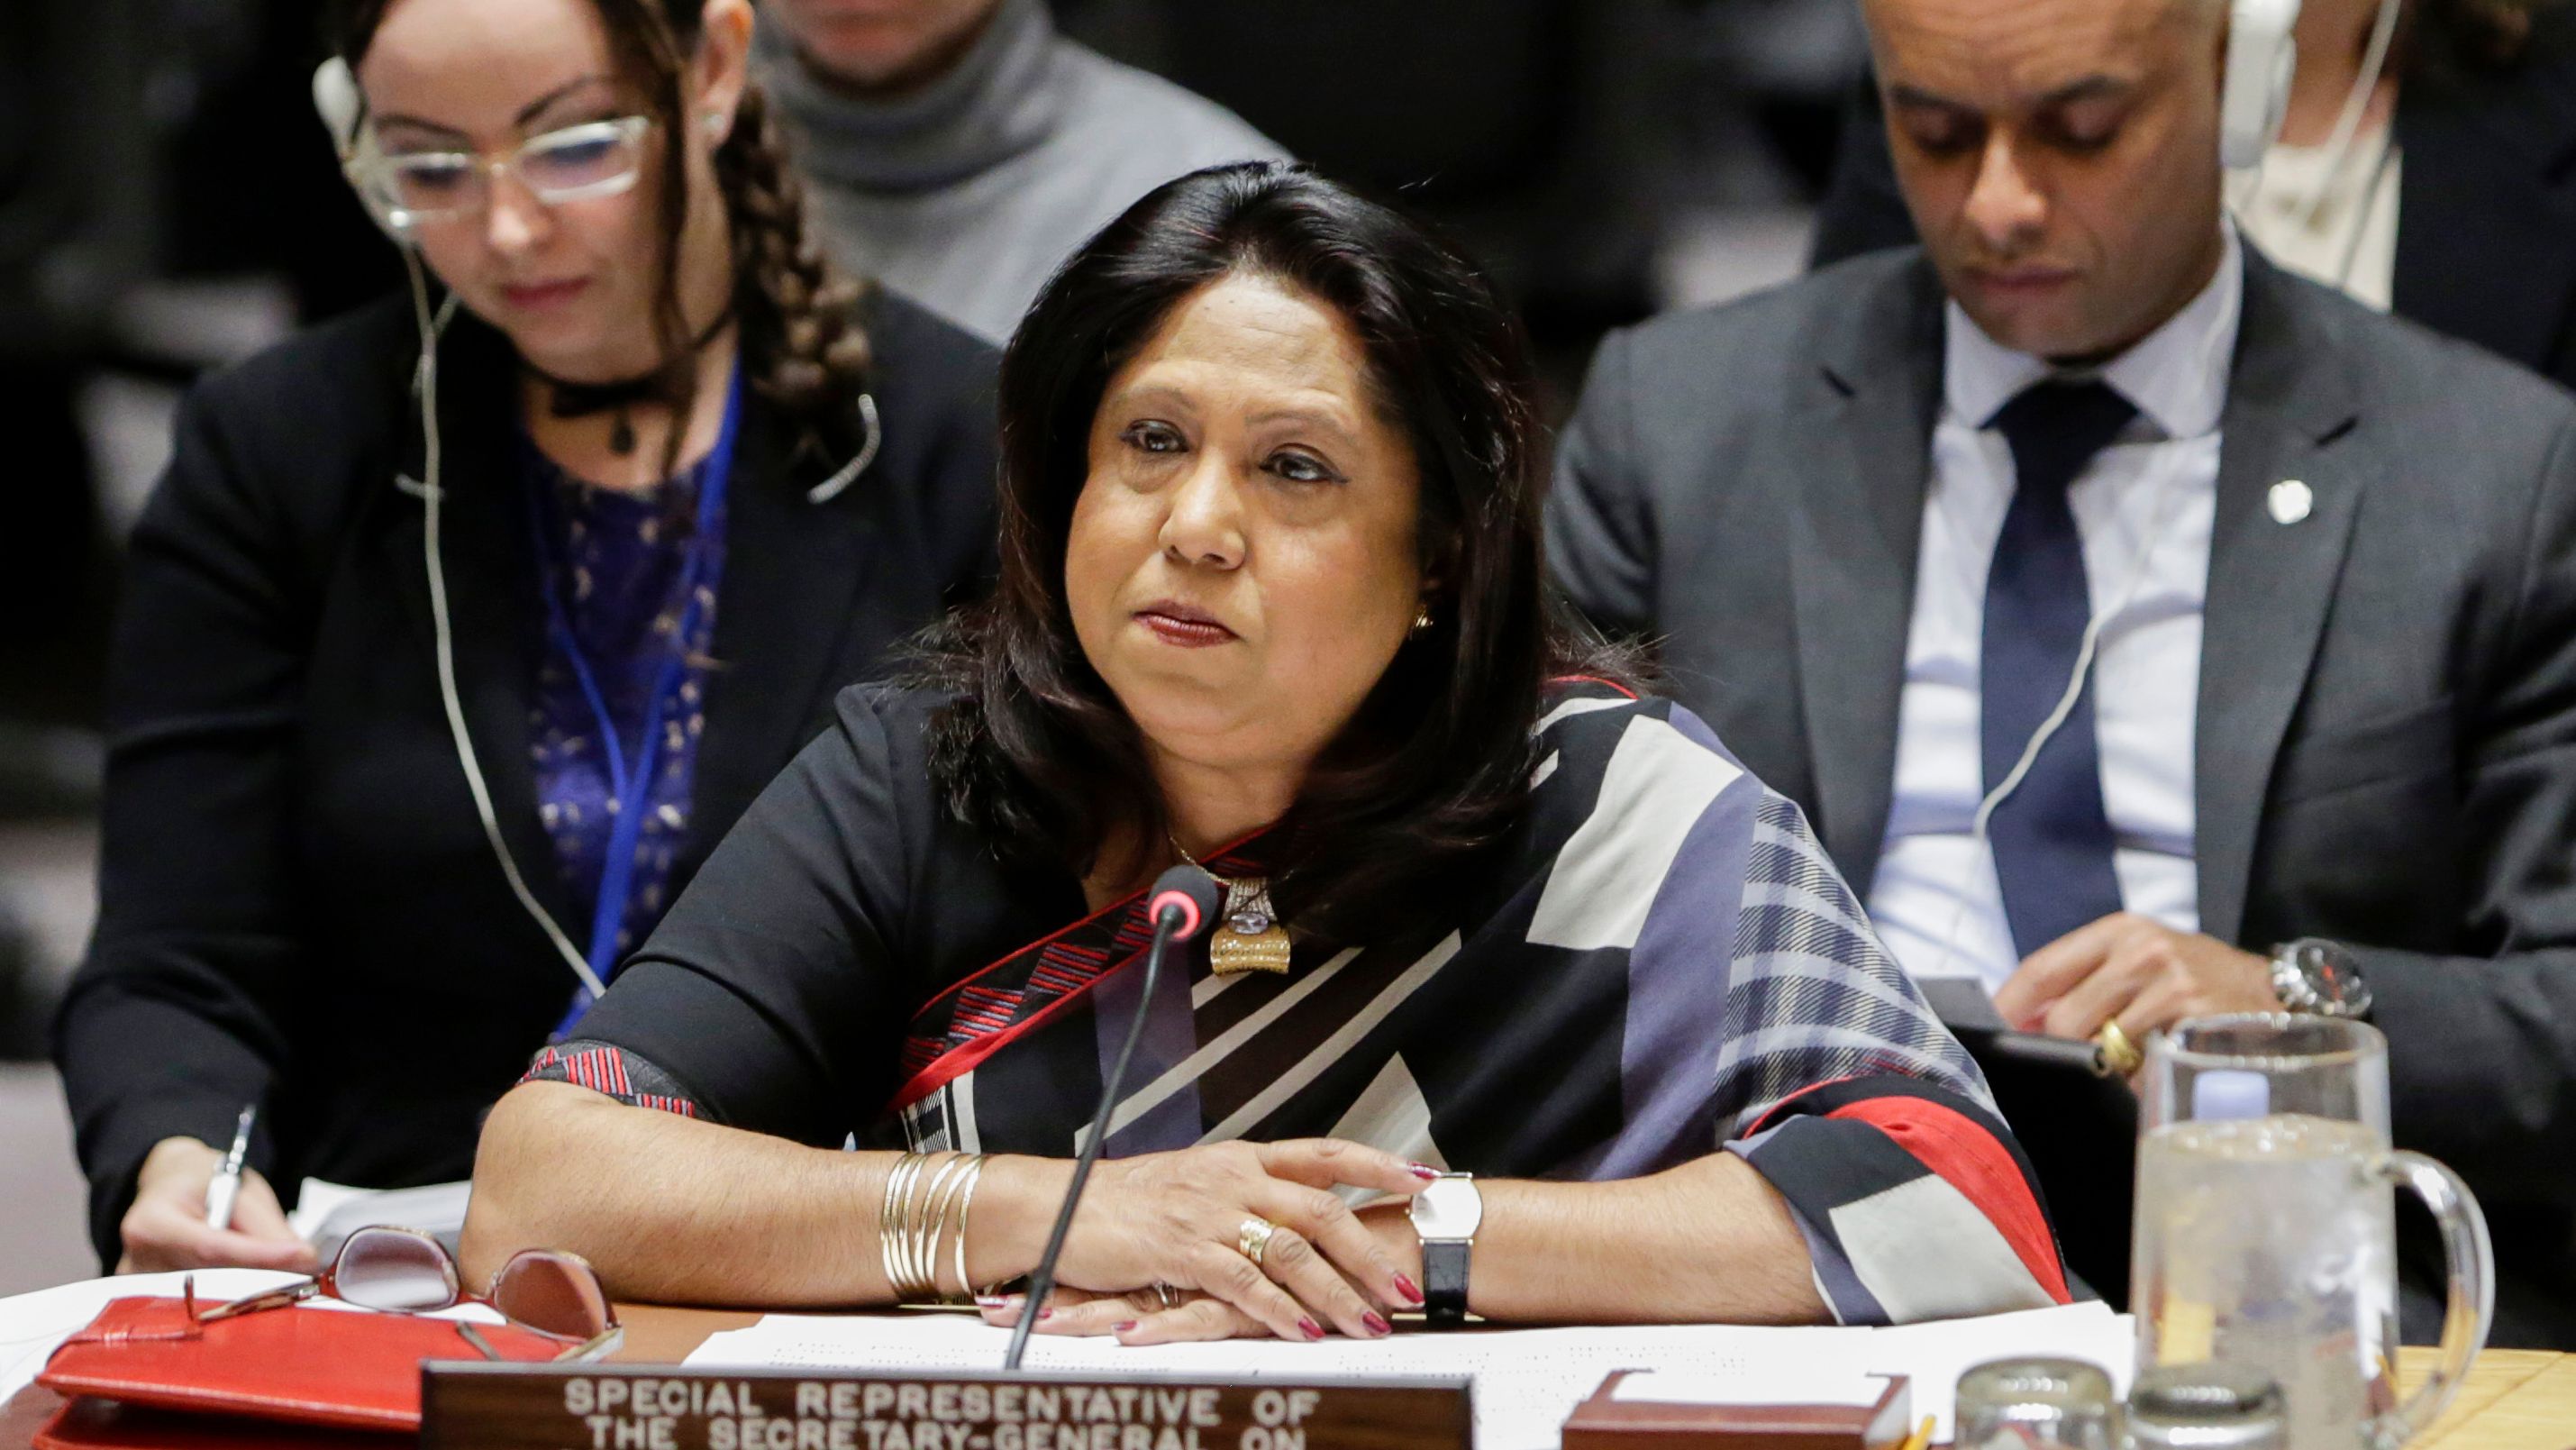 Pramila Patten, Special Representative of the UN Secretary-General on Sexual Violence in Conflict, at a Security Council meeting in New York in 2018.